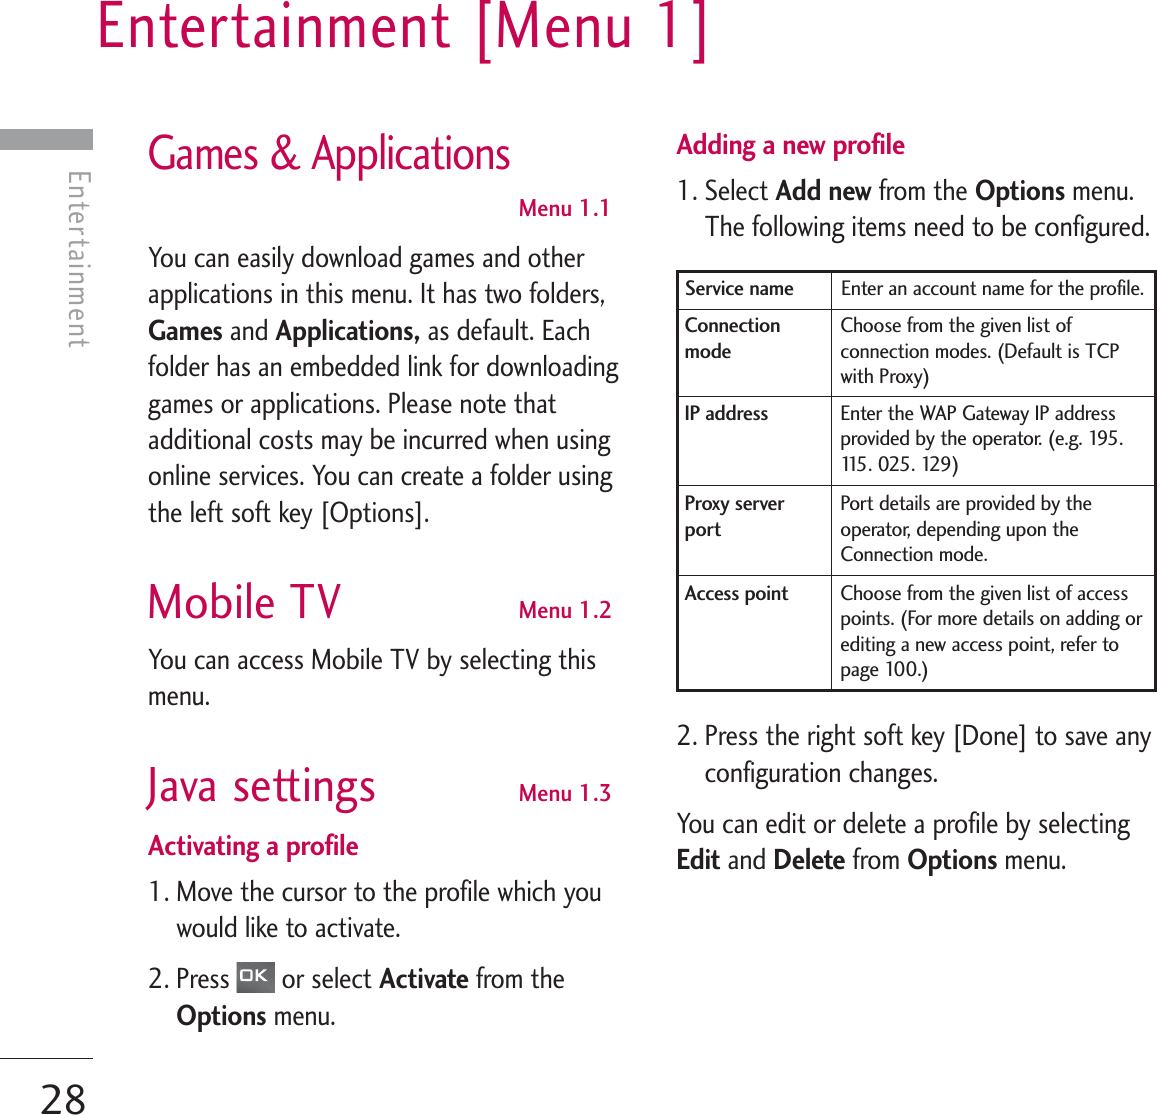 Entertainment [Menu 1]28Entertainment Games &amp; ApplicationsMenu 1.1You can easily download games and otherapplications in this menu. It has two folders,Games and Applications, as default. Eachfolder has an embedded link for downloadinggames or applications. Please note thatadditional costs may be incurred when usingonline services. You can create a folder usingthe left soft key [Options].Mobile TV Menu 1.2You can access Mobile TV by selecting thismenu. Java settings Menu 1.3Activating a profile1. Move the cursor to the profile which youwould like to activate.2. Press  or select Activate from theOptions menu.Adding a new profile 1. Select Add new from the Options menu.The following items need to be configured.2. Press the right soft key [Done] to save anyconfiguration changes.You can edit or delete a profile by selectingEdit and Delete from Options menu.Enter an account name for the profile.Service name Choose from the given list ofconnection modes. (Default is TCPwith Proxy)Connectionmode Enter the WAP Gateway IP addressprovided by the operator. (e.g. 195.115 .  0 25 .  129 )IP addressPort details are provided by theoperator, depending upon theConnection mode.Proxy serverport Choose from the given list of accesspoints. (For more details on adding orediting a new access point, refer topage 100.)Access point